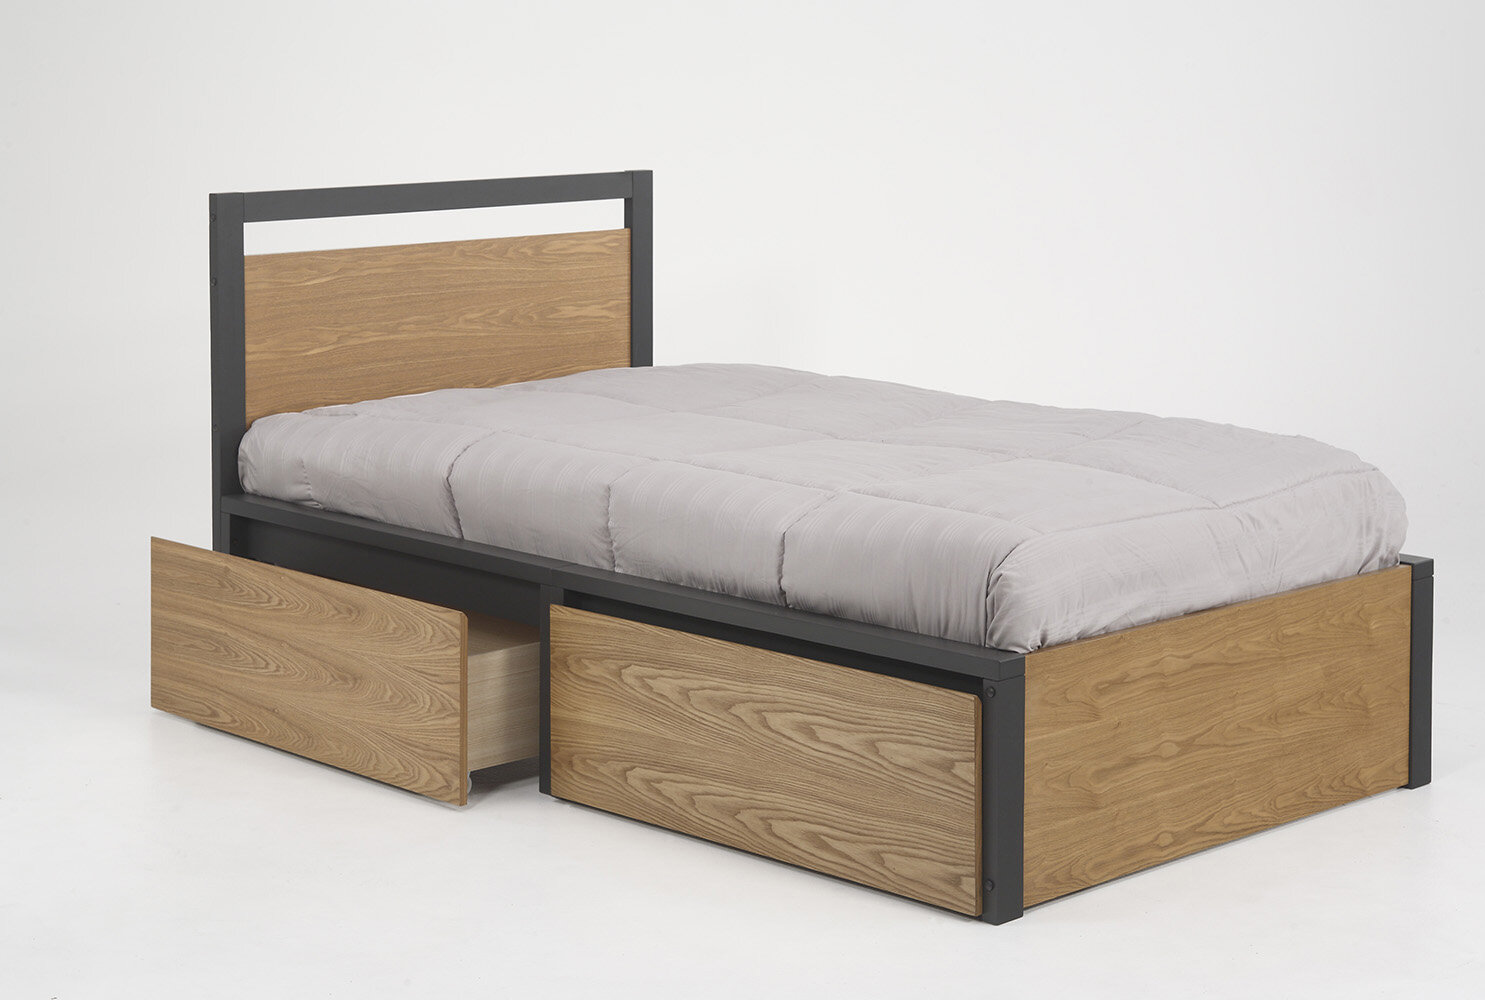 Isabelle & Max™ Ewald Twin Platform Bed with Drawers & Reviews 